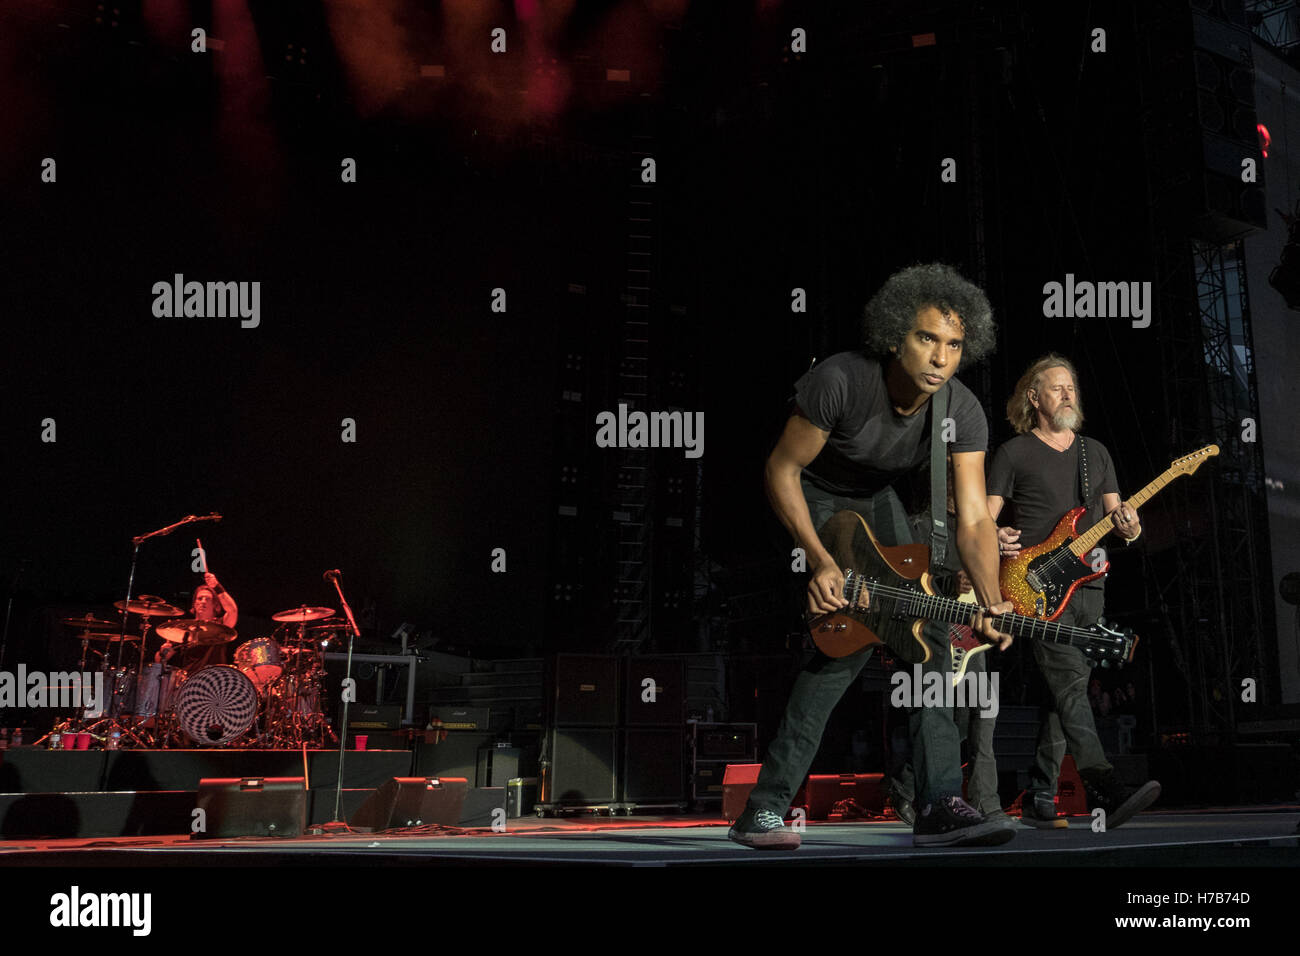 Chicago, Illinois, USA. 3rd July, 2016. SEAN KINNEY, WILLIAM DUVALL and JERRY CANTRELL of Alice in Chains perform live at Soldier Field during the Not in This Lifetime tour in Chicago, Illinois © Daniel DeSlover/ZUMA Wire/Alamy Live News Stock Photo